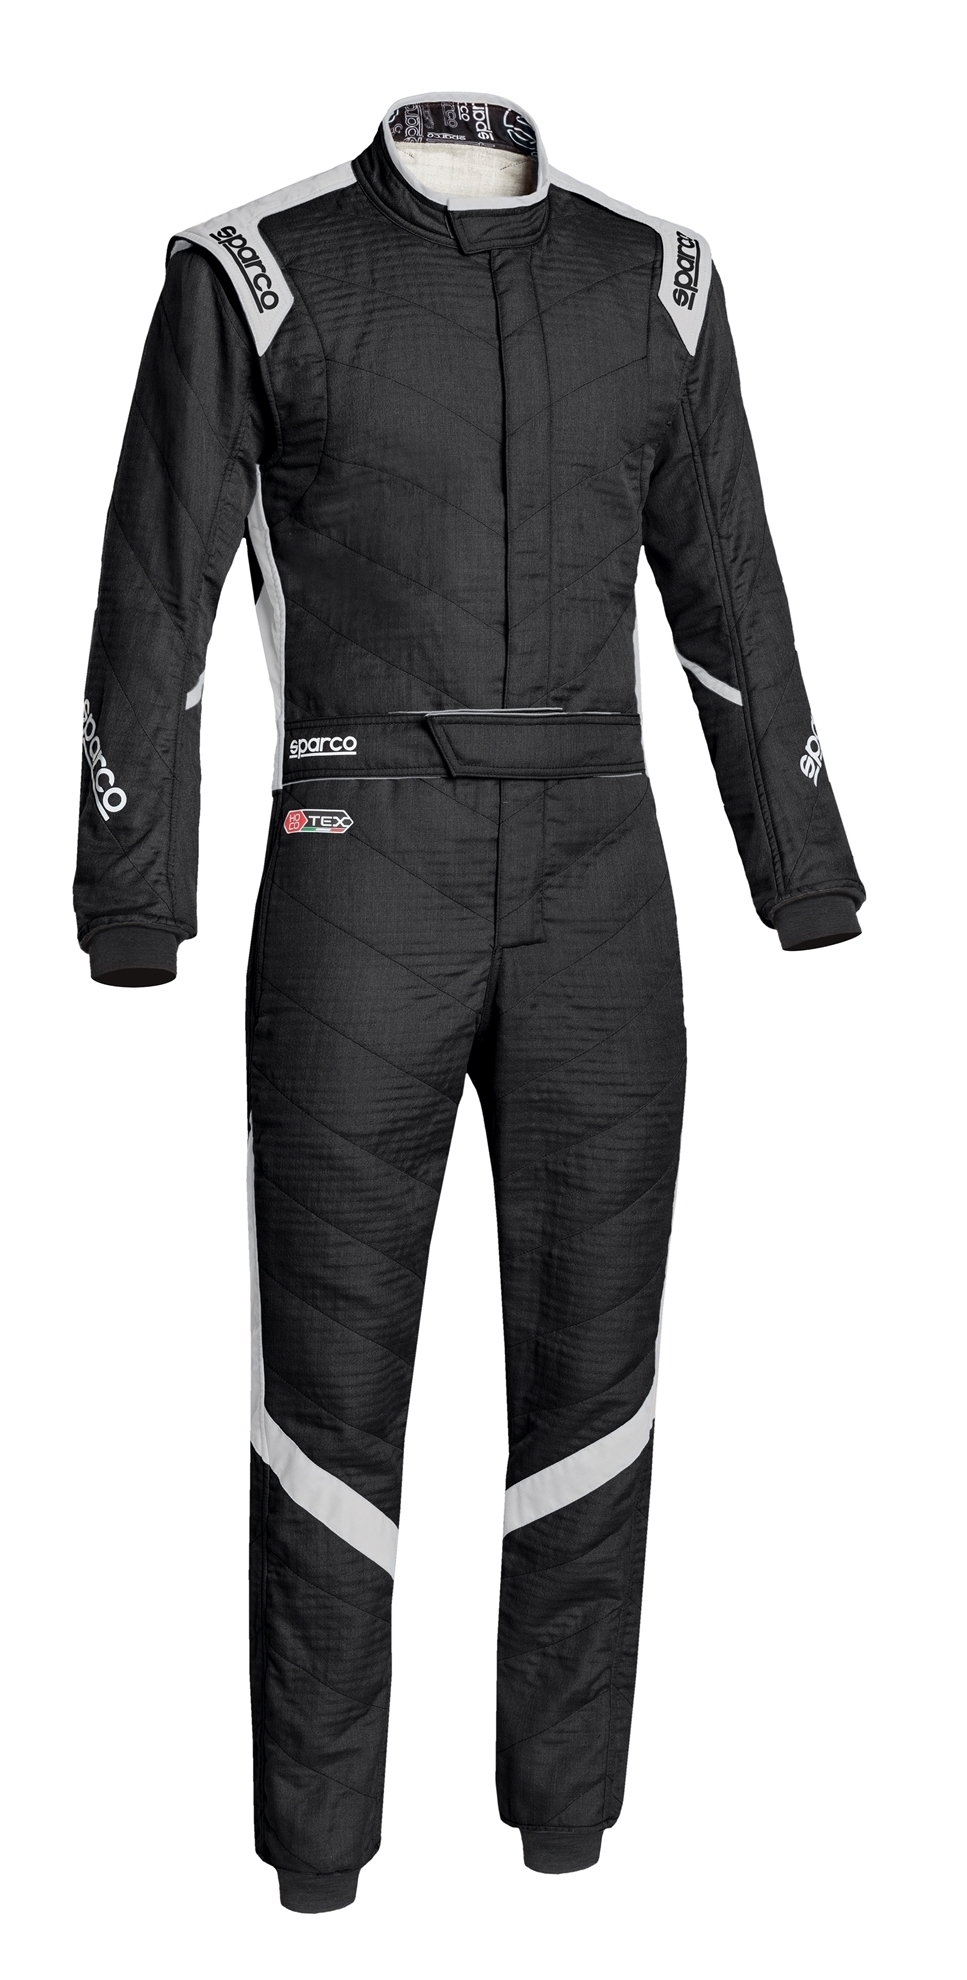 SPARCO Suit Victory Blk/Gray XX-Large 0011277HB64NRGR | eBay